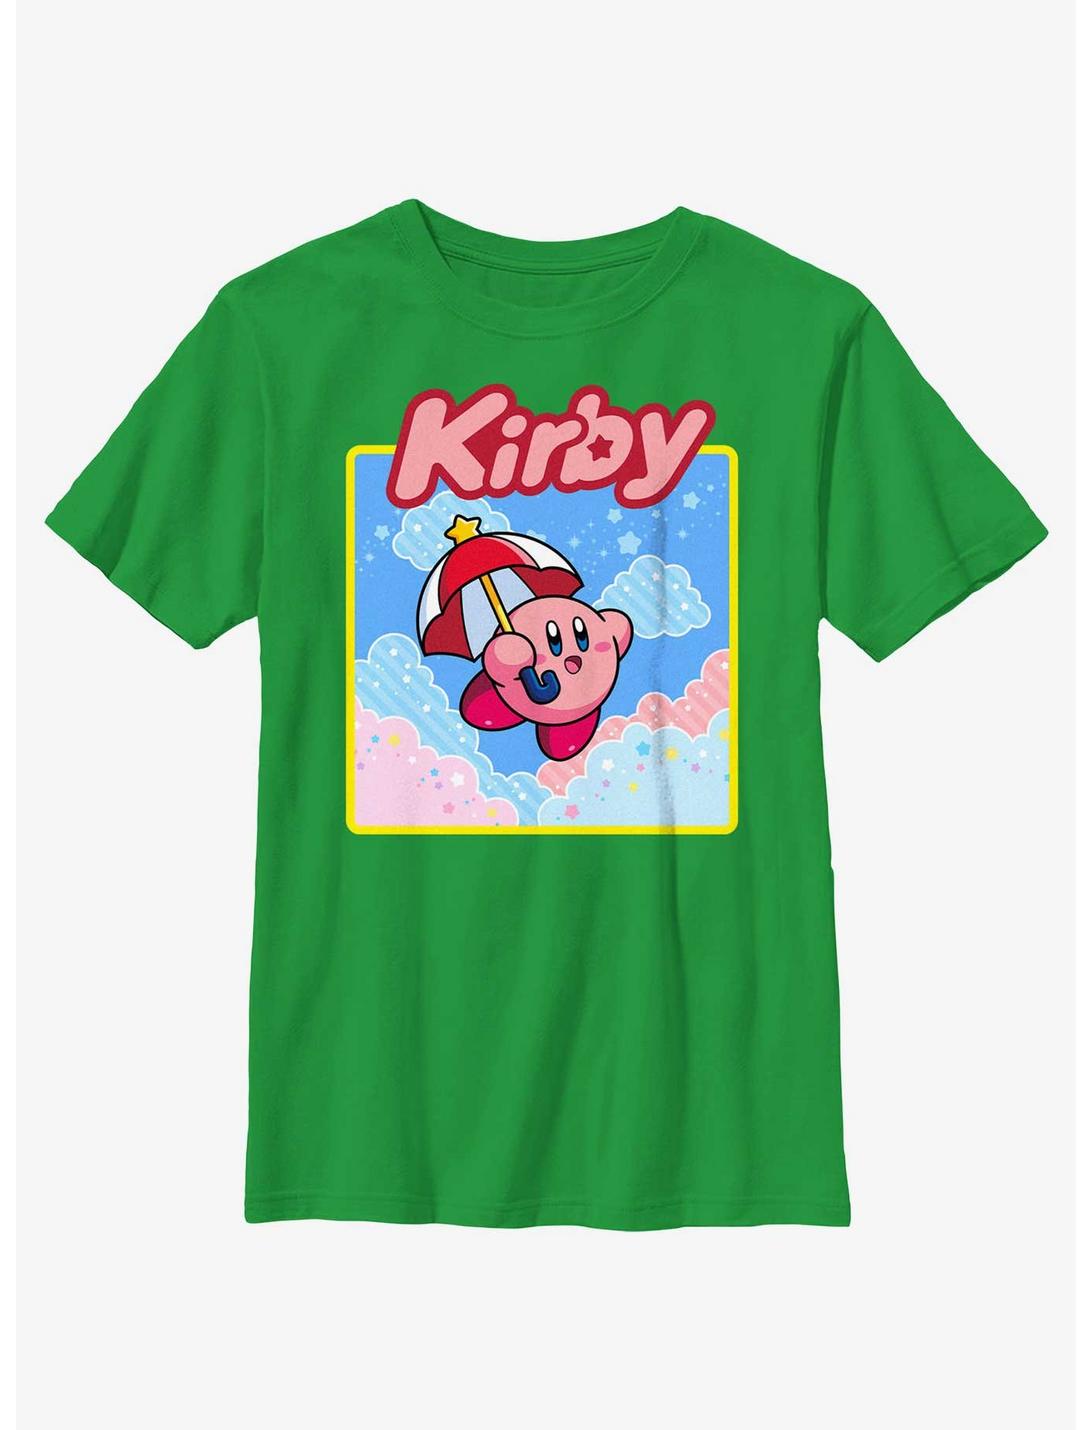 Kirby Starry Parasol Youth T-Shirt, KELLY, hi-res